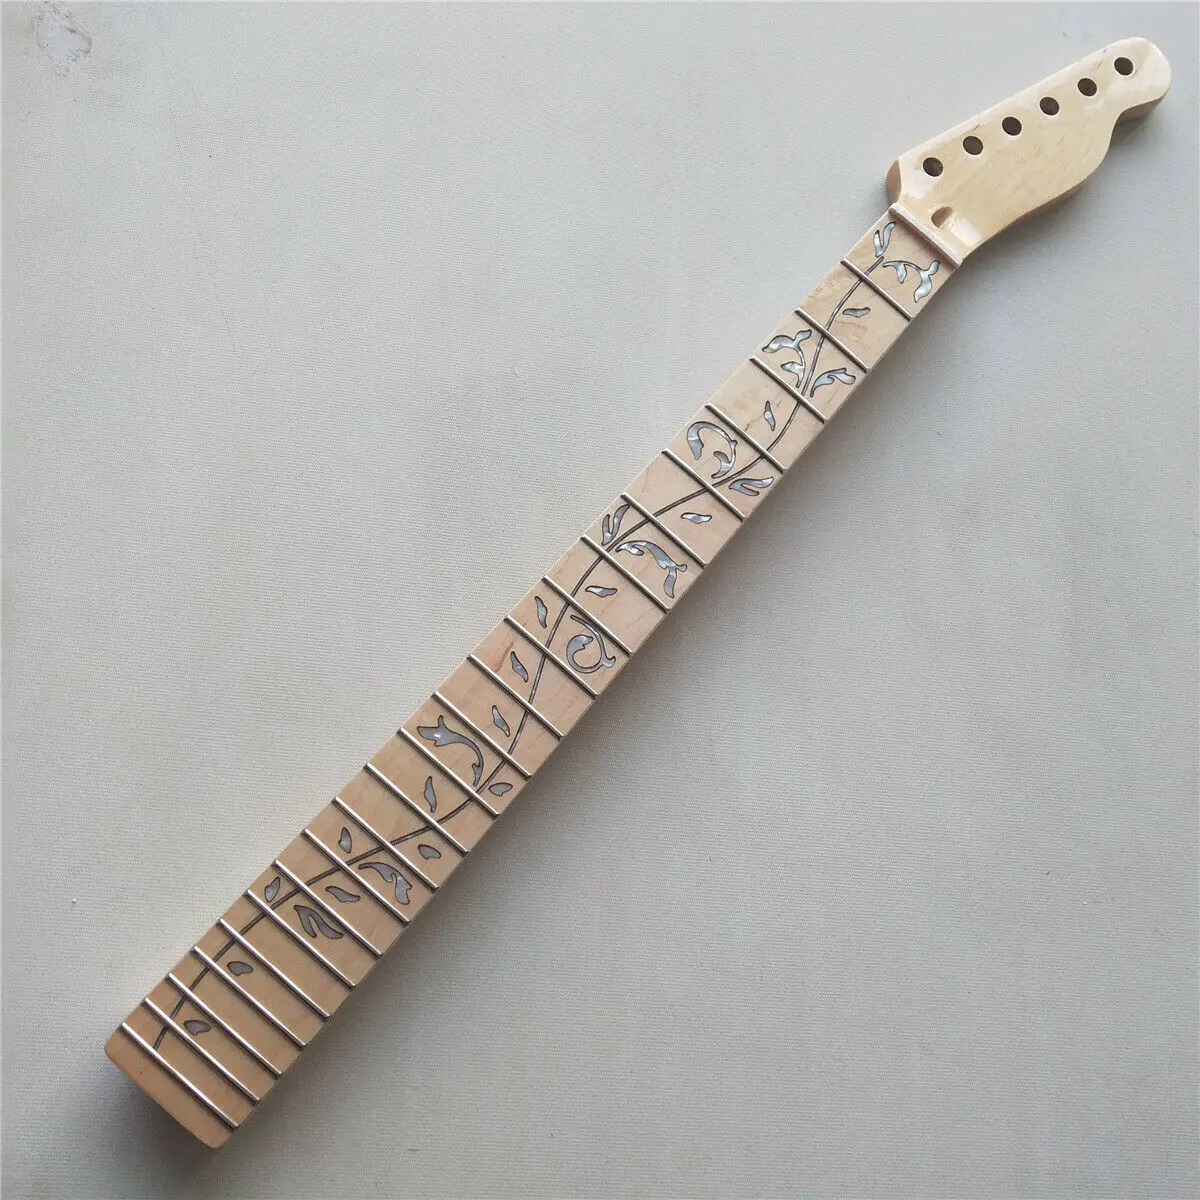 Beautiful DIY Maple Electric Guitar Neck 22 fret 25.5inch Glazed White Vine Inlay Maple Fretboard New Replacement